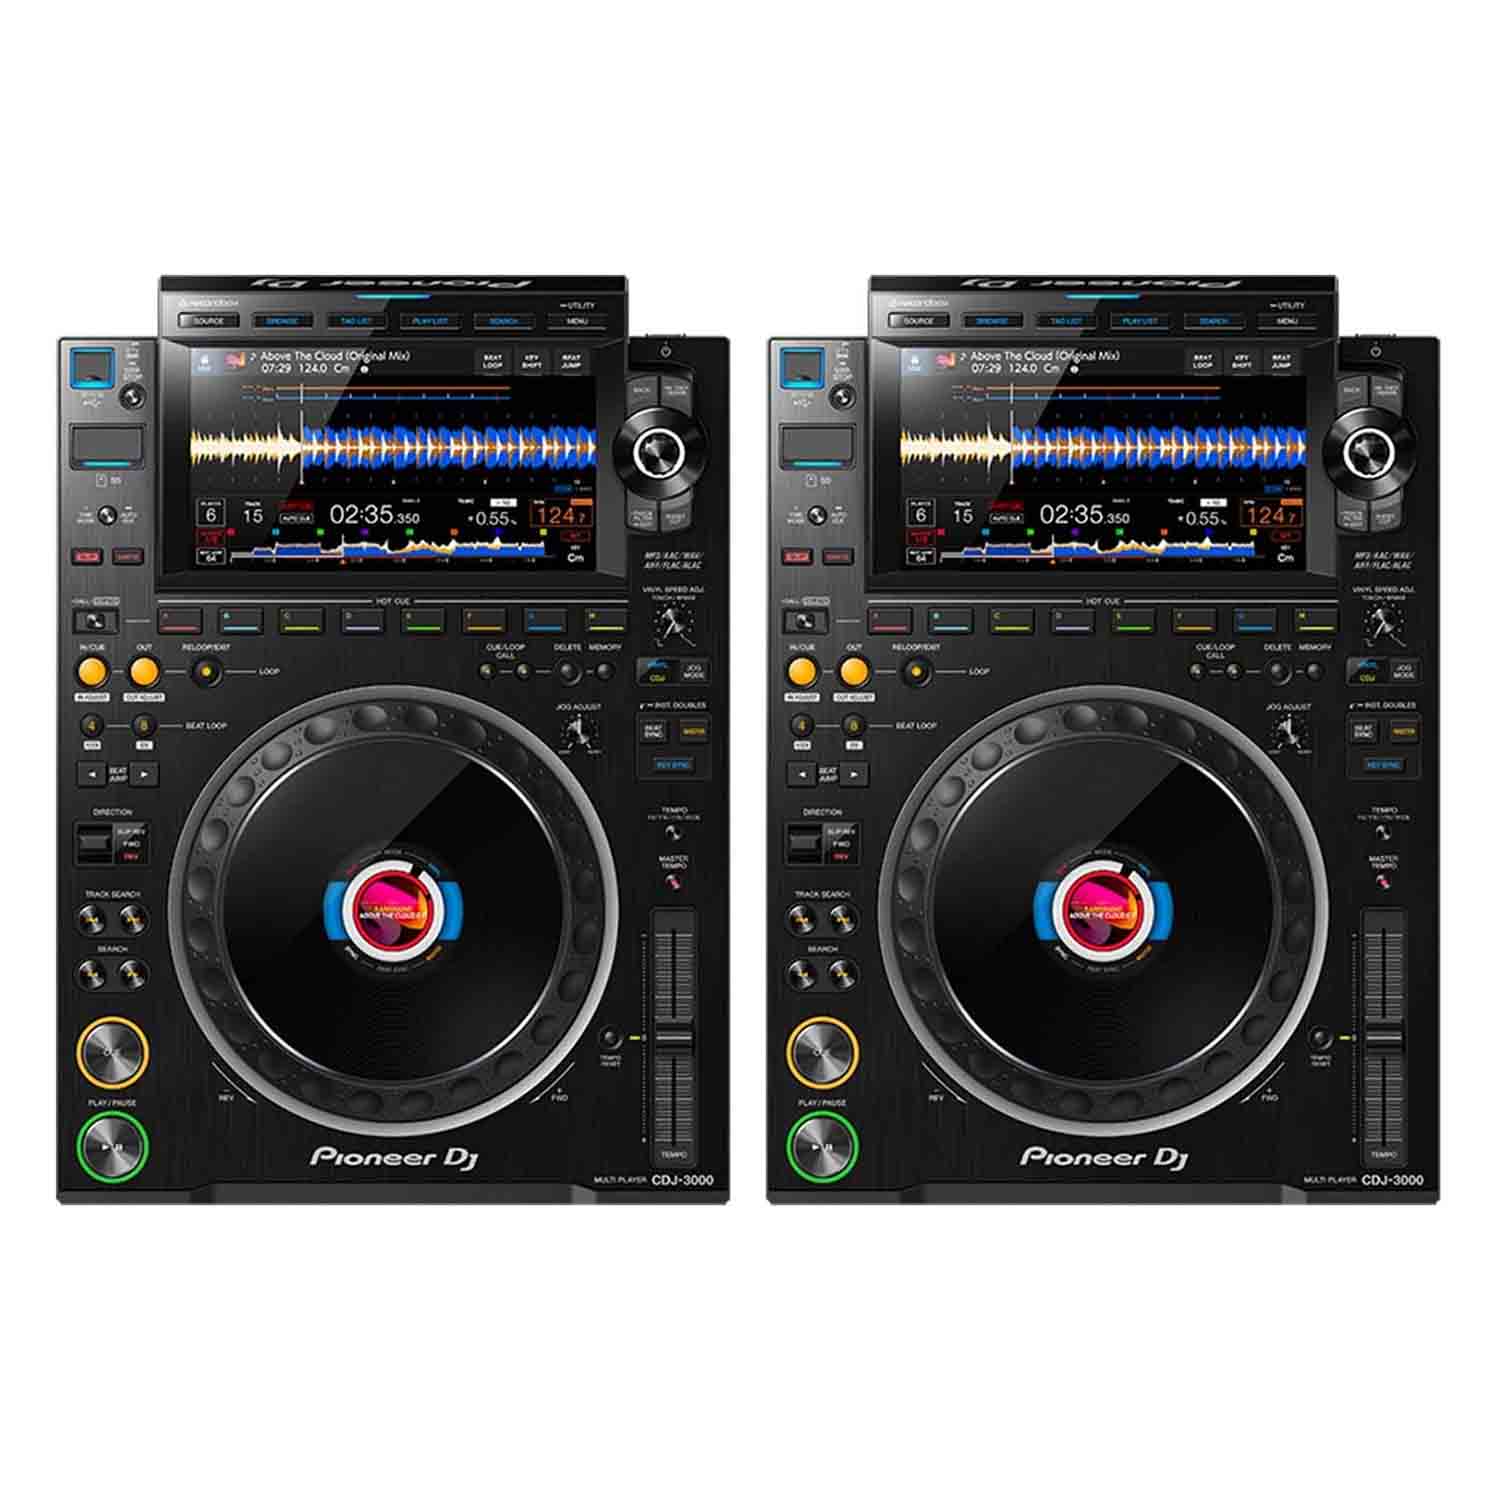 CDJ3000 Club DJ Package with DJM-900NXS2, QSC Speakers, Pro Case, Speaker Stands and Accessories - Black - Hollywood DJ